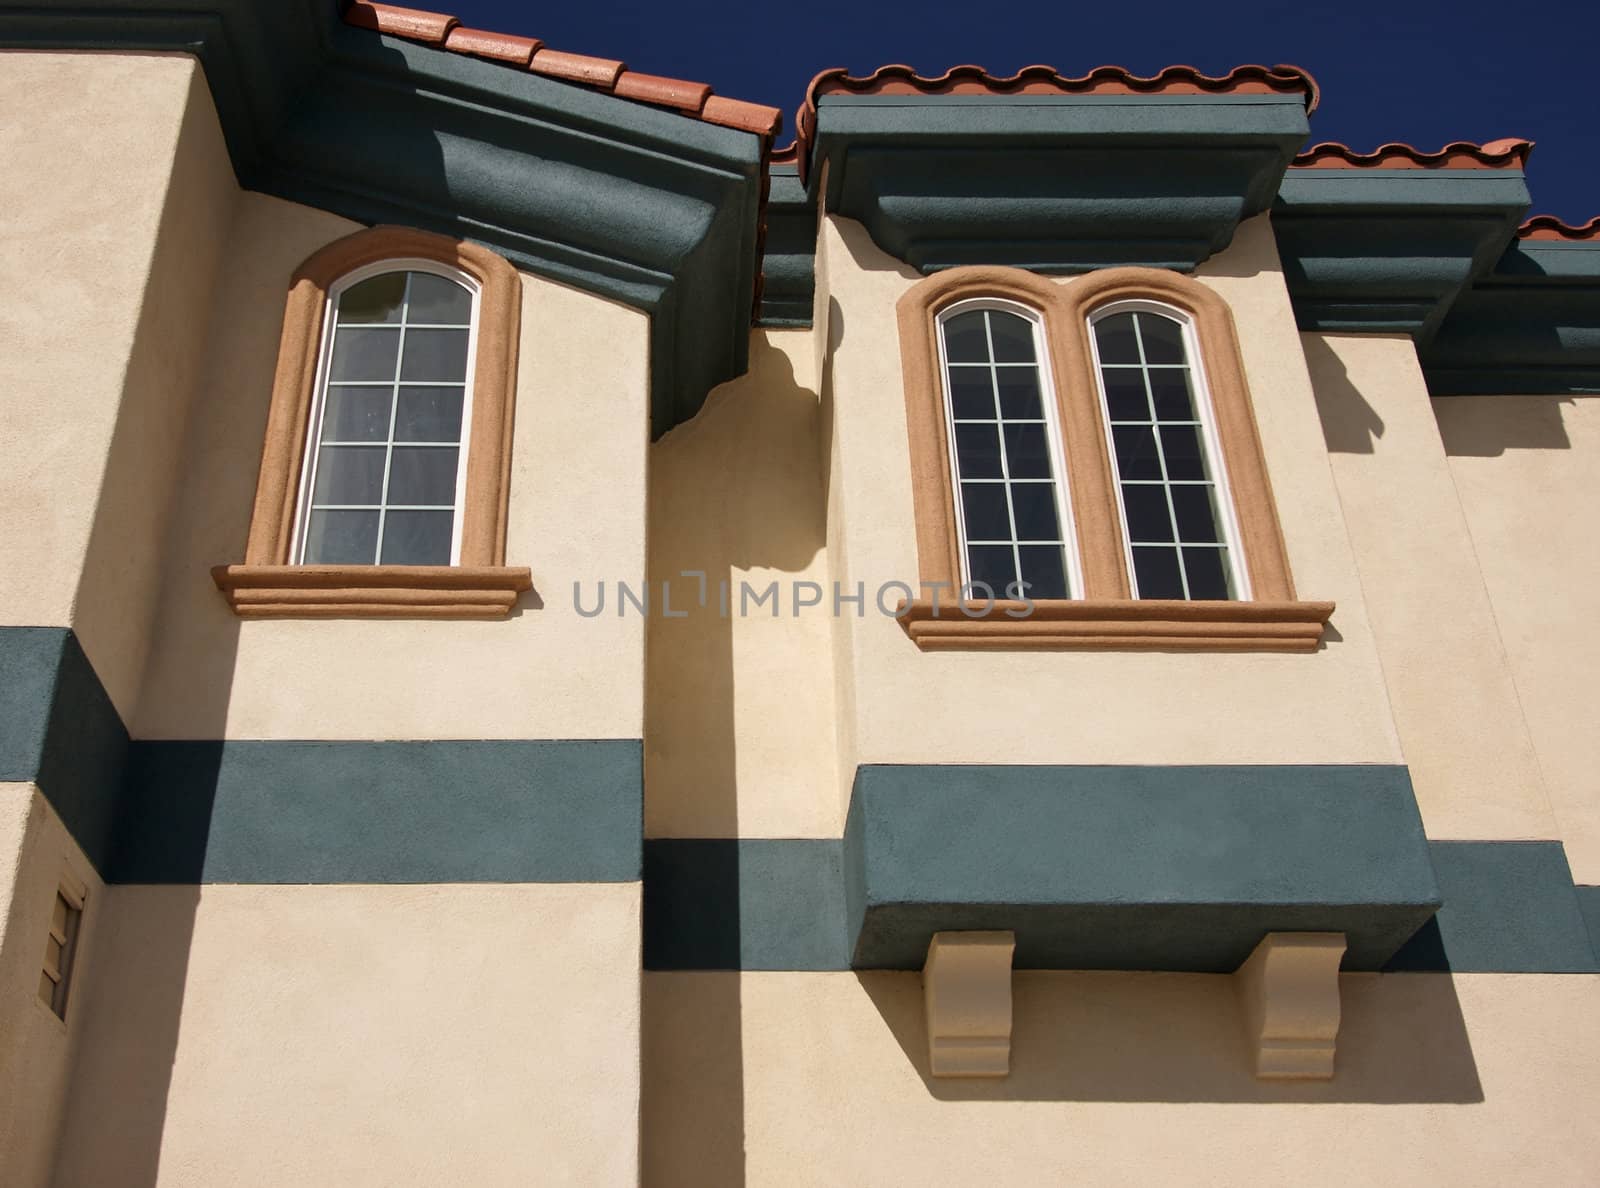 Abstract of New Architectural Details with Spanish Tile and Stucco.